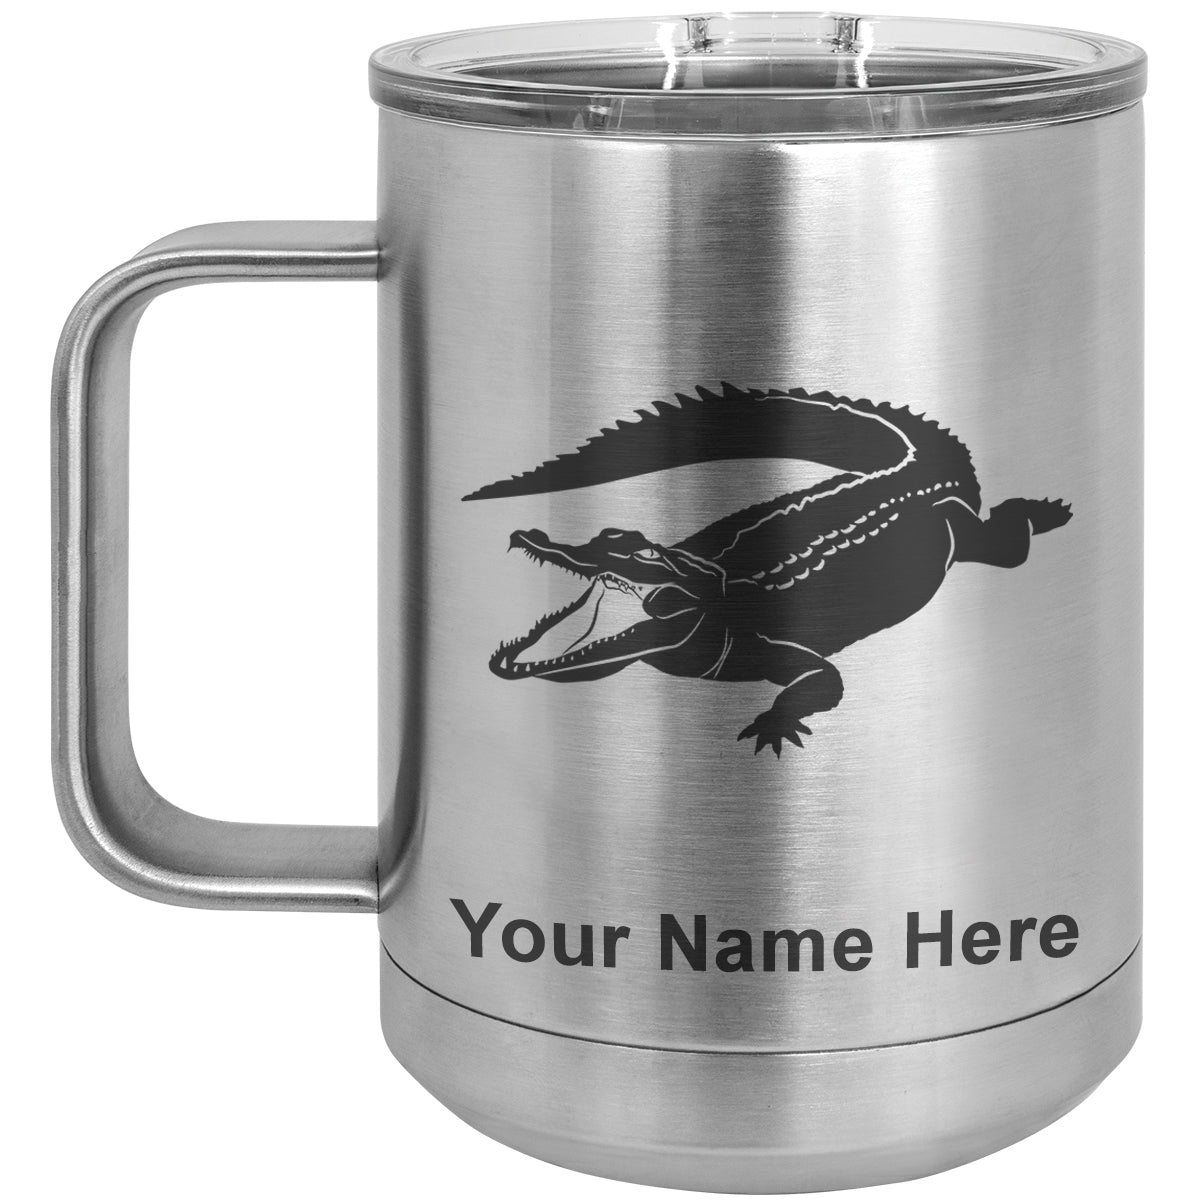 15oz Vacuum Insulated Coffee Mug, Alligator, Personalized Engraving Included